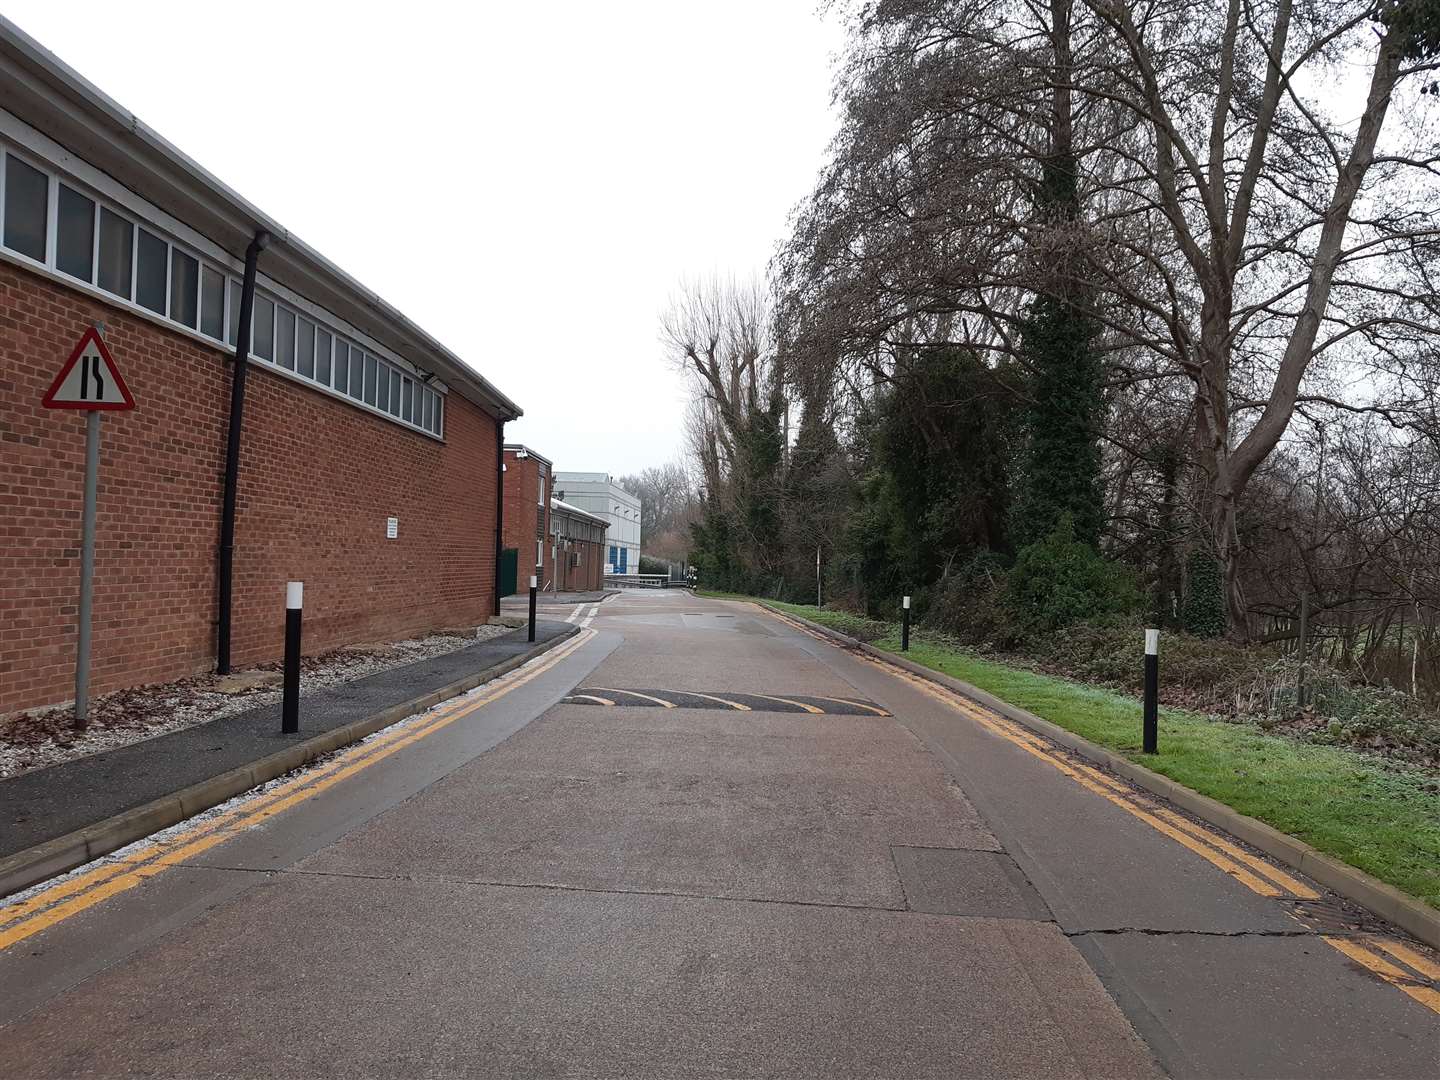 The current Mace Industrial Estate entry road